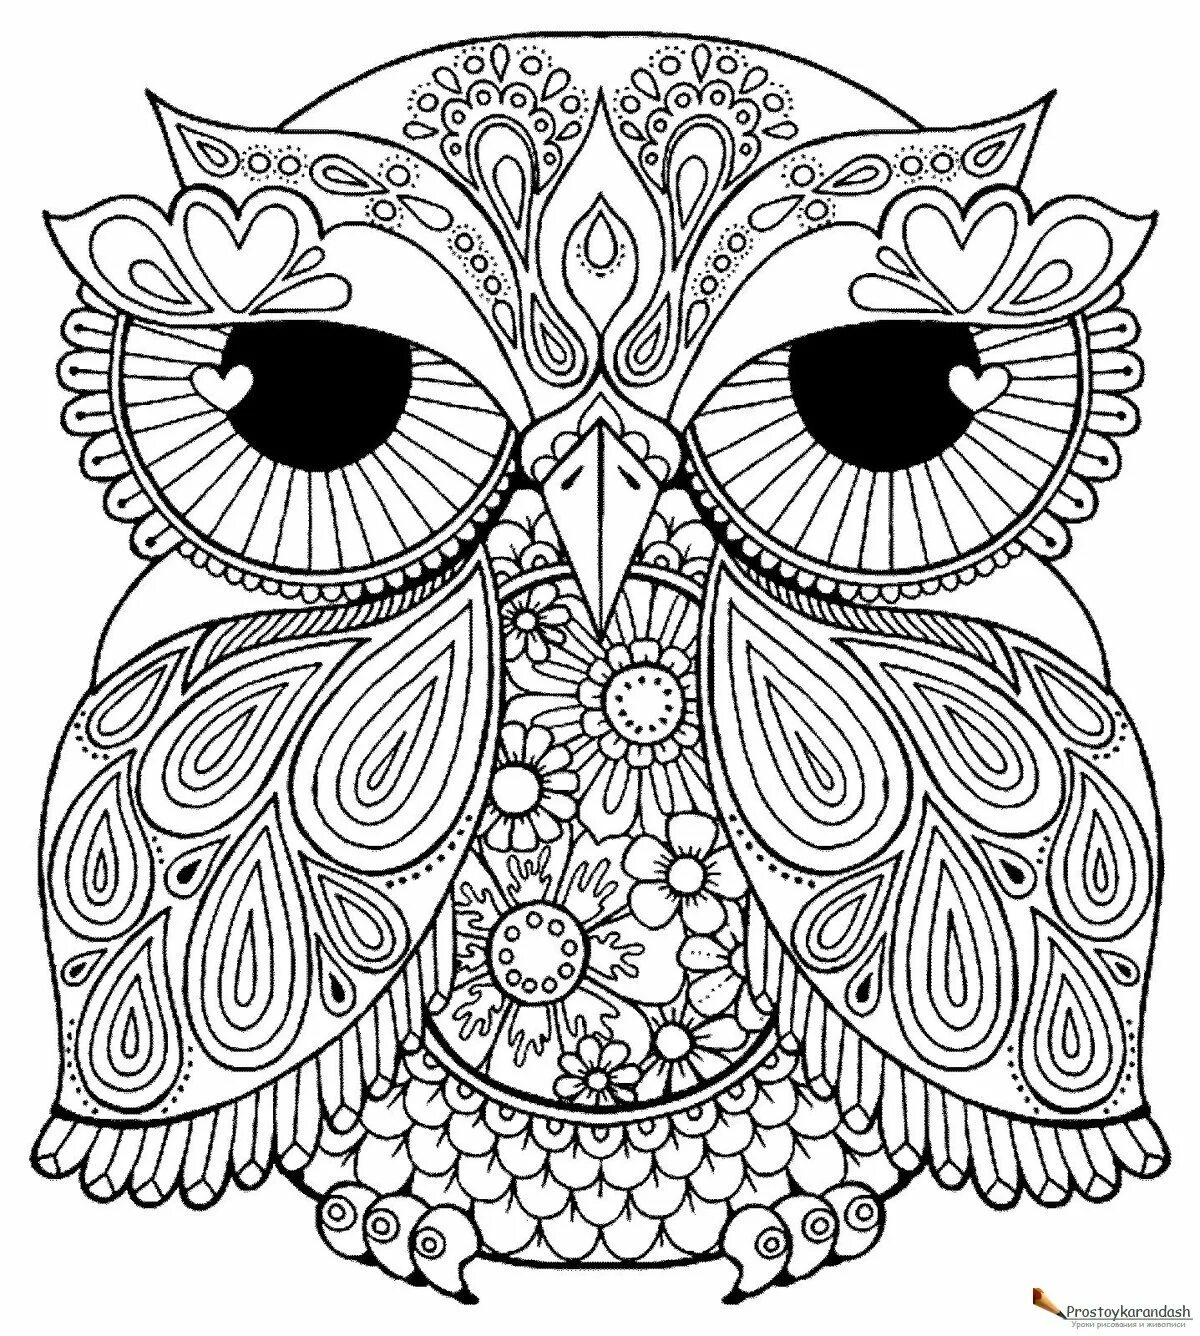 Touching anti-stress coloring book for adults